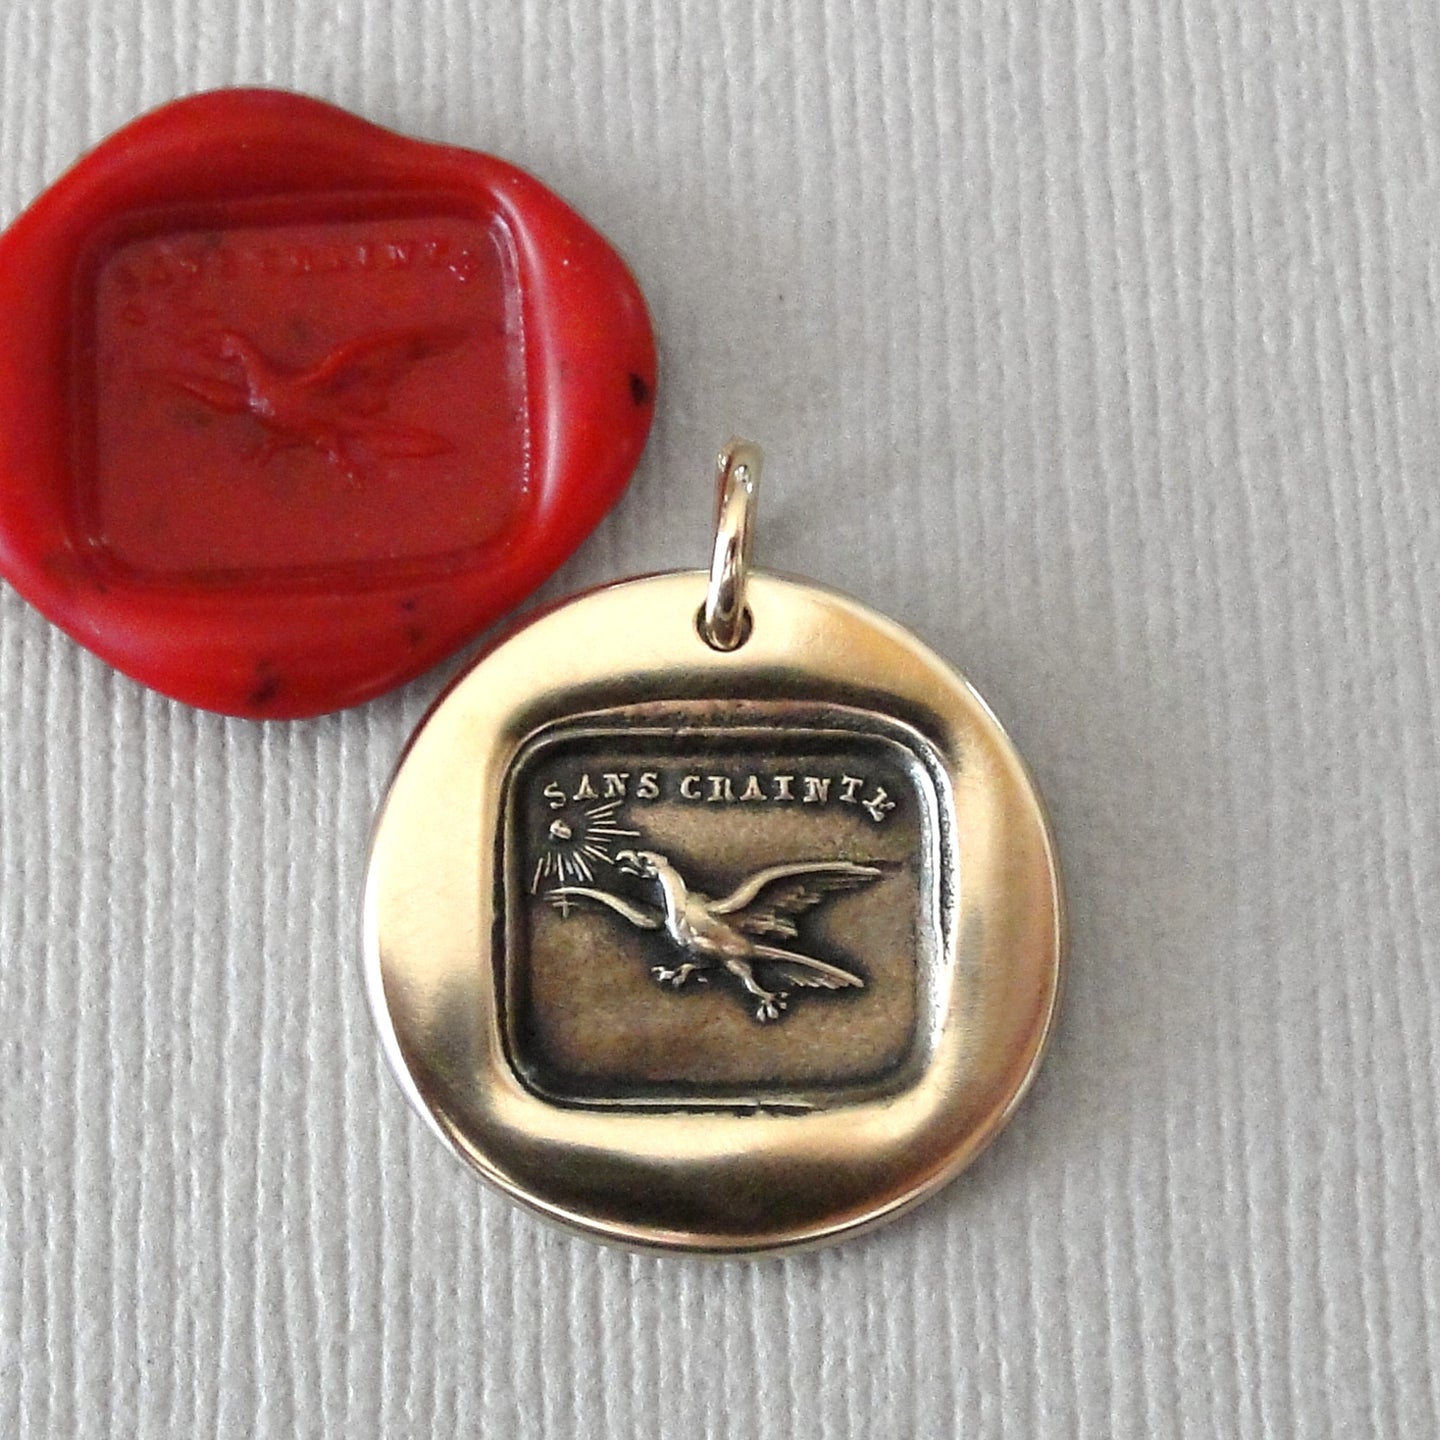 Fearless Wax Seal Charm with eagle - Soar Without Fear - antique wax seal charm jewelry French No Fear motto - RQP Studio